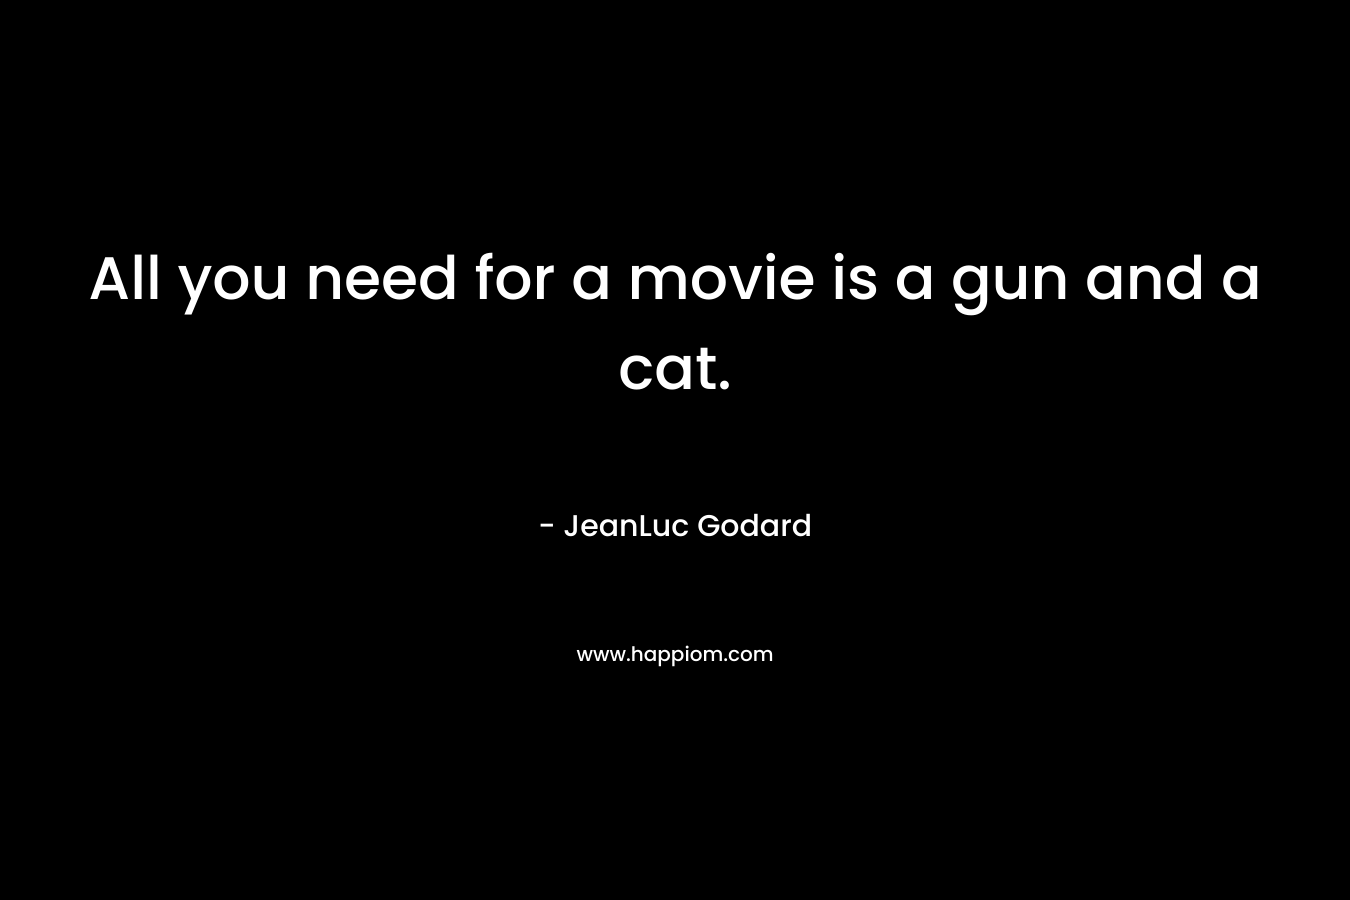 All you need for a movie is a gun and a cat. – JeanLuc Godard